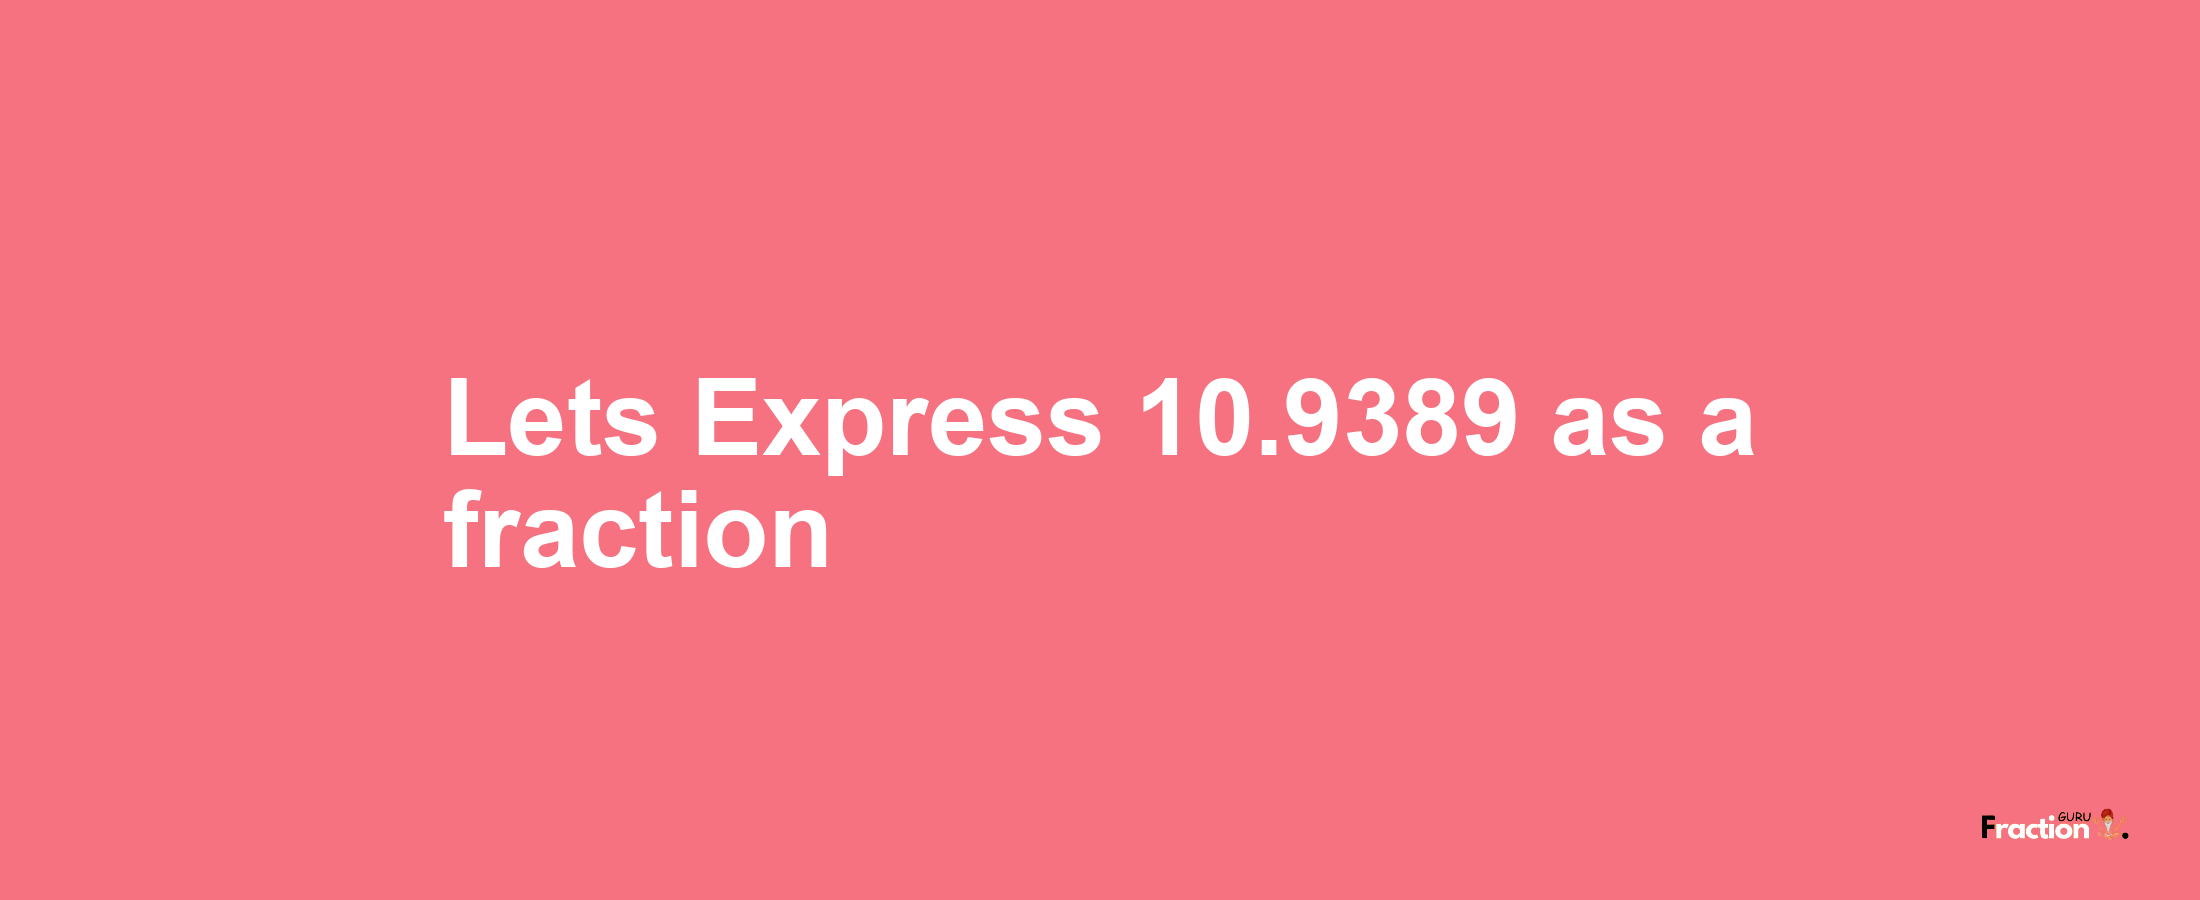 Lets Express 10.9389 as afraction